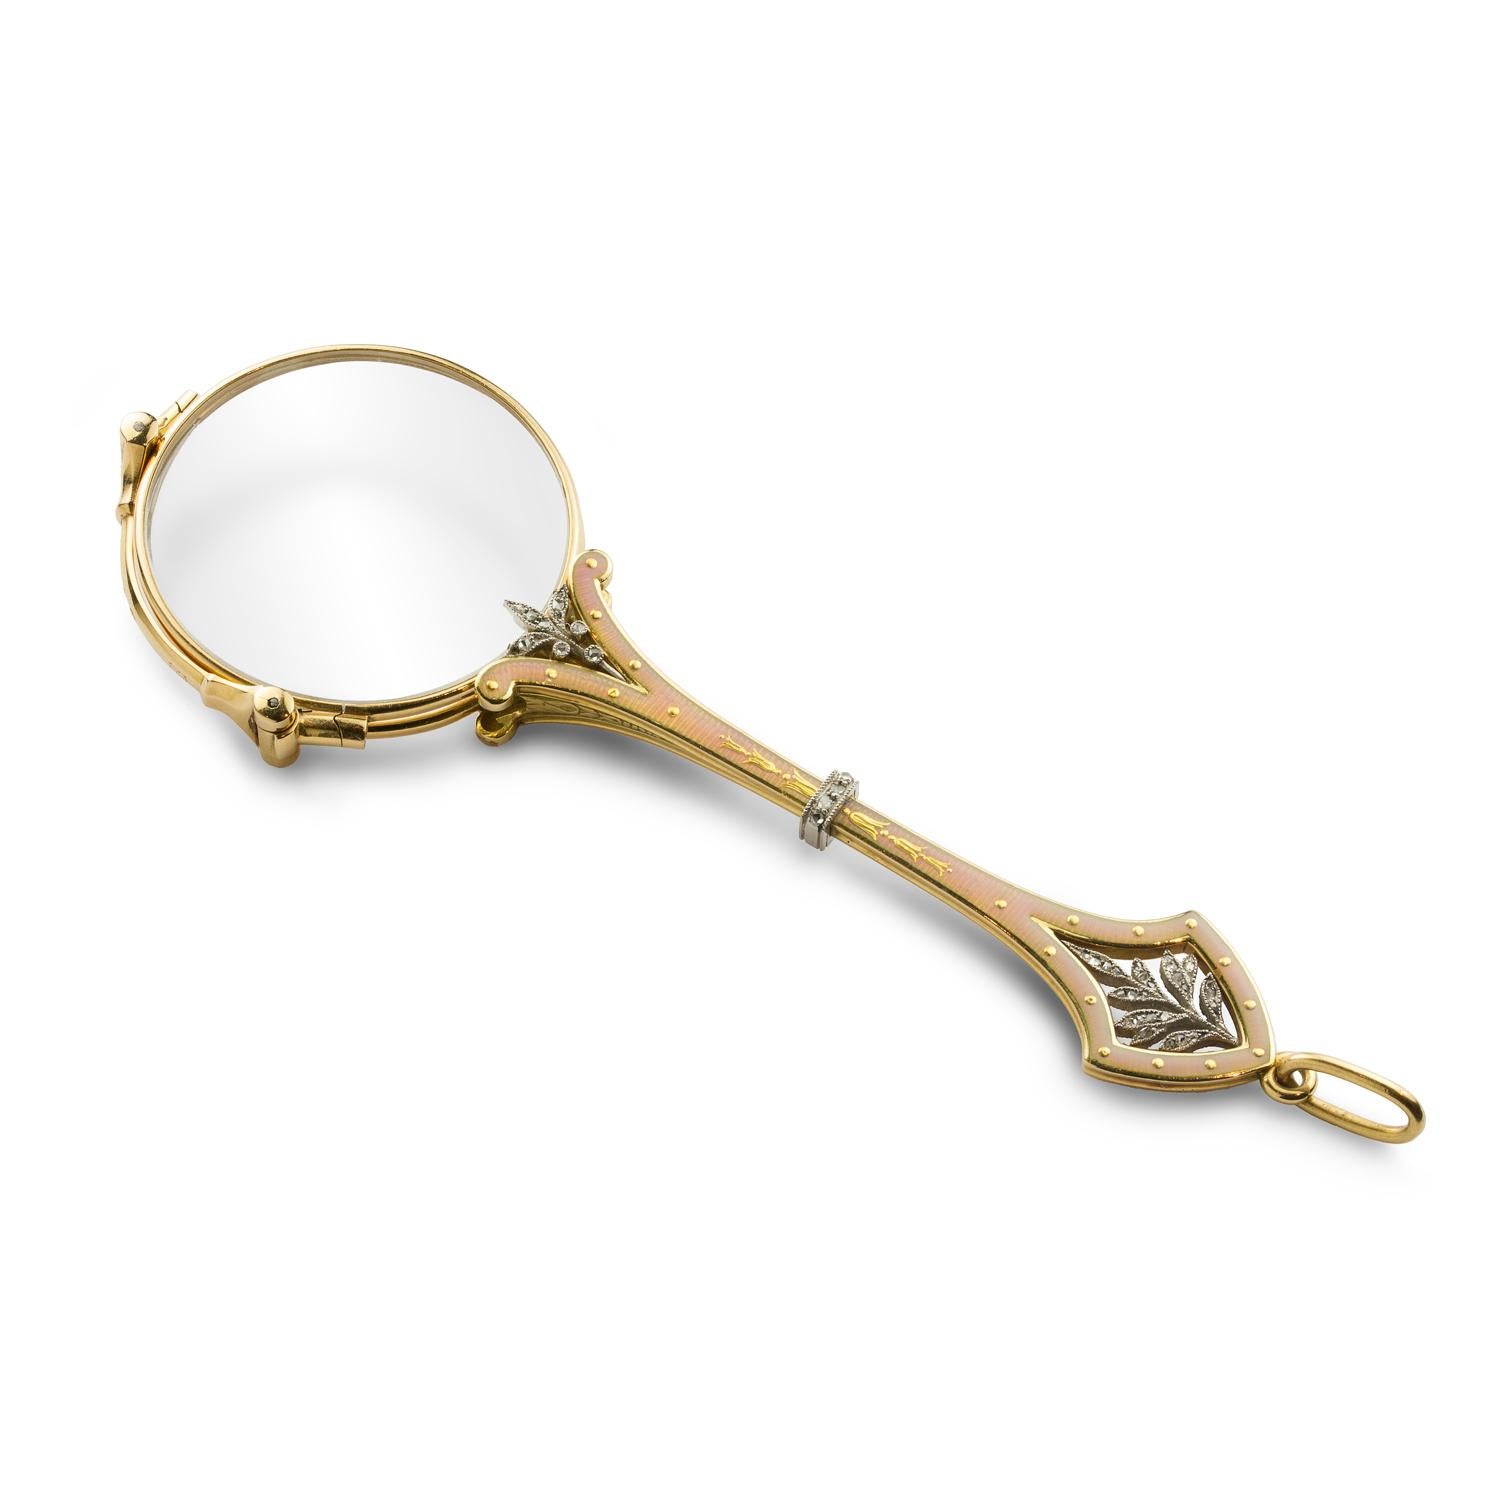 A fine Cartier enamel and gold lorgnette, the lorgnette consisting of two circular lenses each within a yellow gold mount, the handle with exquisite rose enamel engine-turned background embellished with yellow gold floral motifs and double-sided